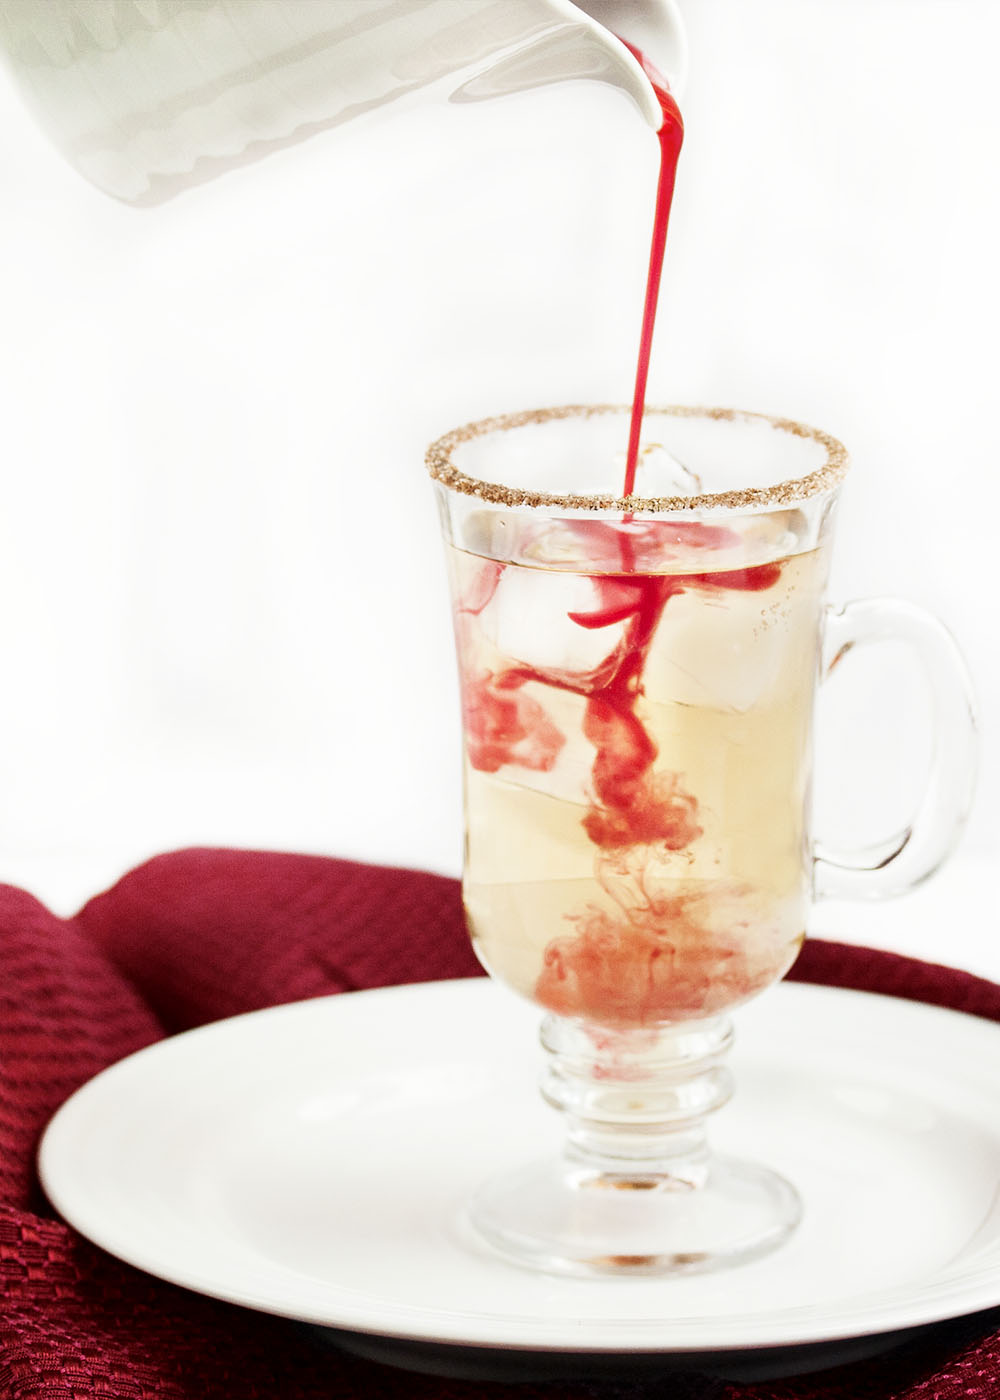 Cranberry Ginger Fizz Cocktail - This cranberry cocktail is an easy and tasty way to celebrate Thanksgiving and the winter holiday season. Just whip up a batch of the yummy cranberry syrup ahead of time and you are good to go. | justalittlebitofbacon.com